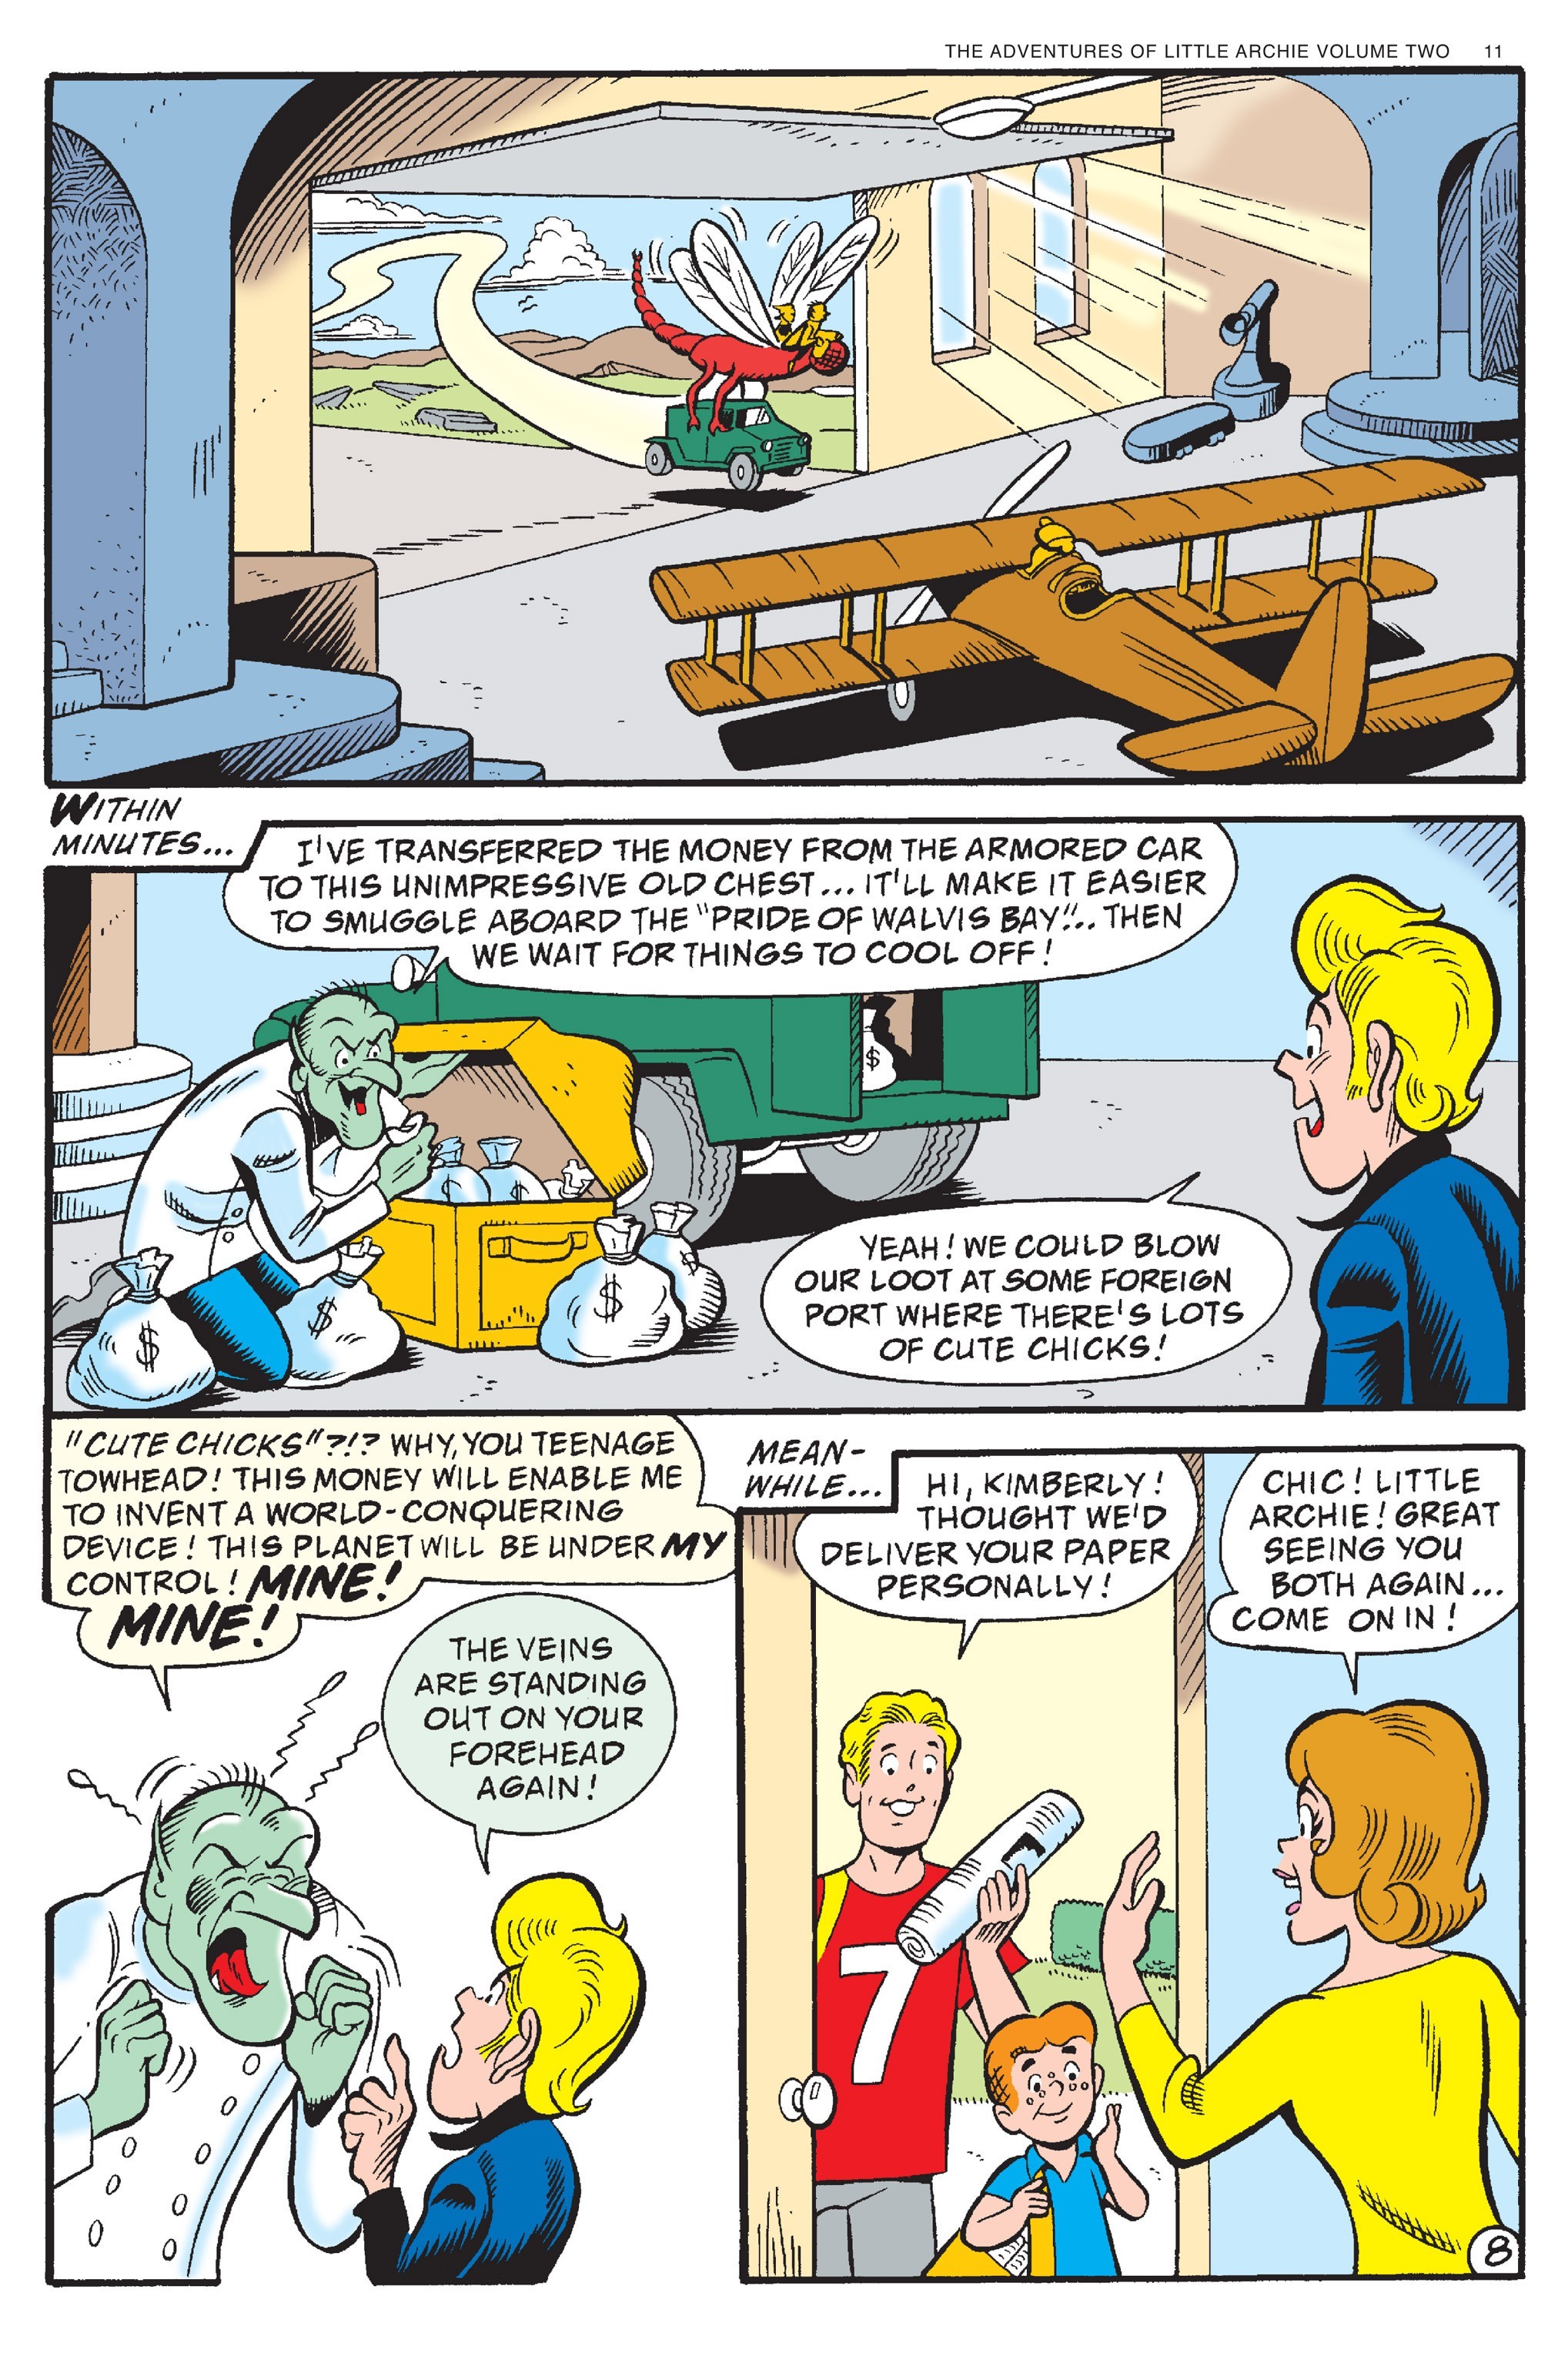 Read online Adventures of Little Archie comic -  Issue # TPB 2 - 12